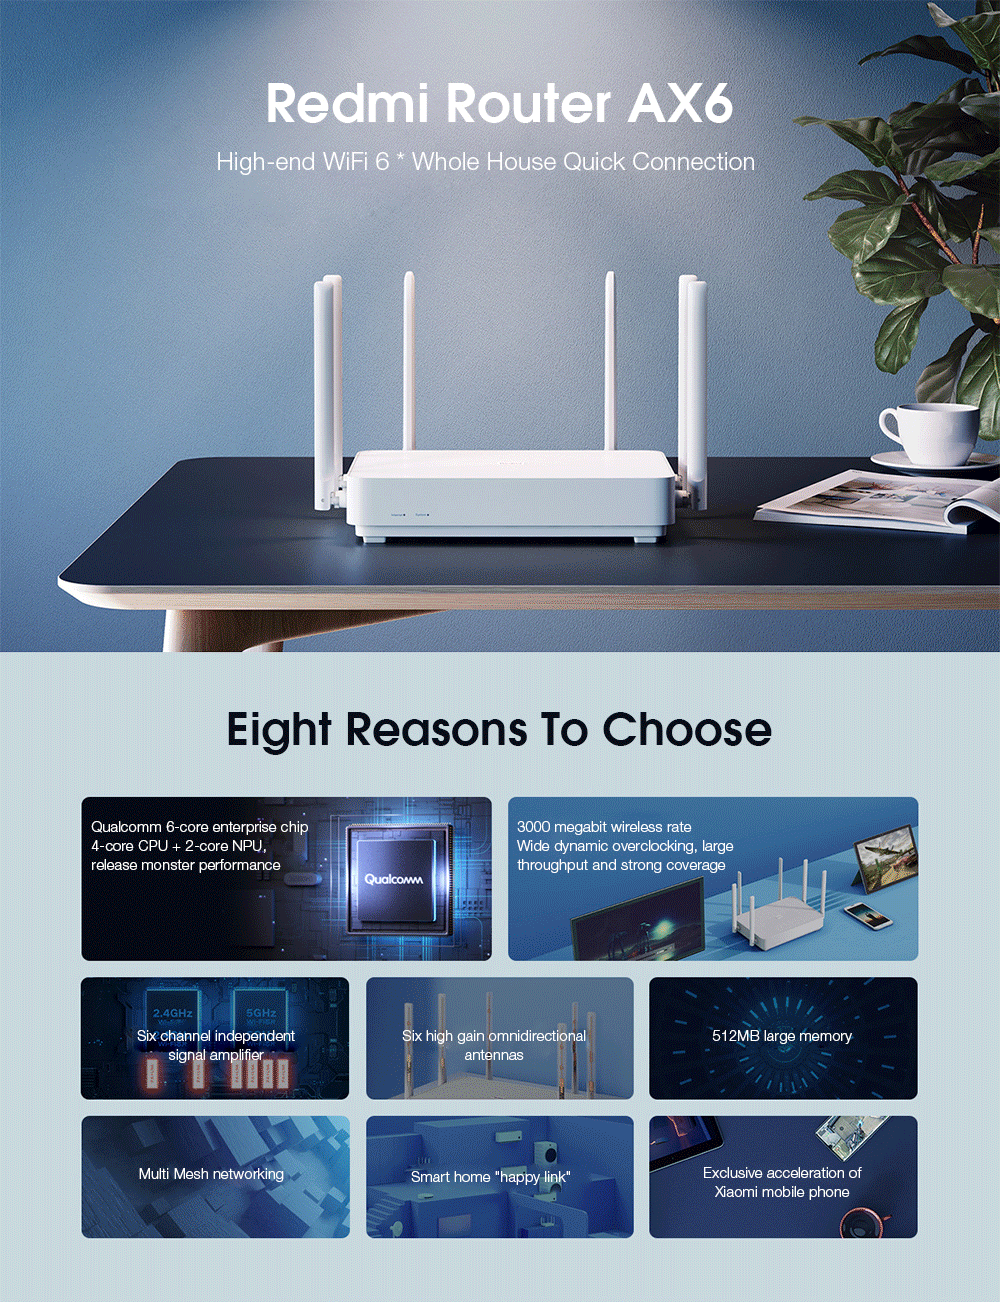 Xiaomi-Redmi-AX6-Router-4-Core-WiFi6-Dual-Band-Wireless-WiFi-Router-Support-Mesh-OFDMA-2402MBps-512M-1729610